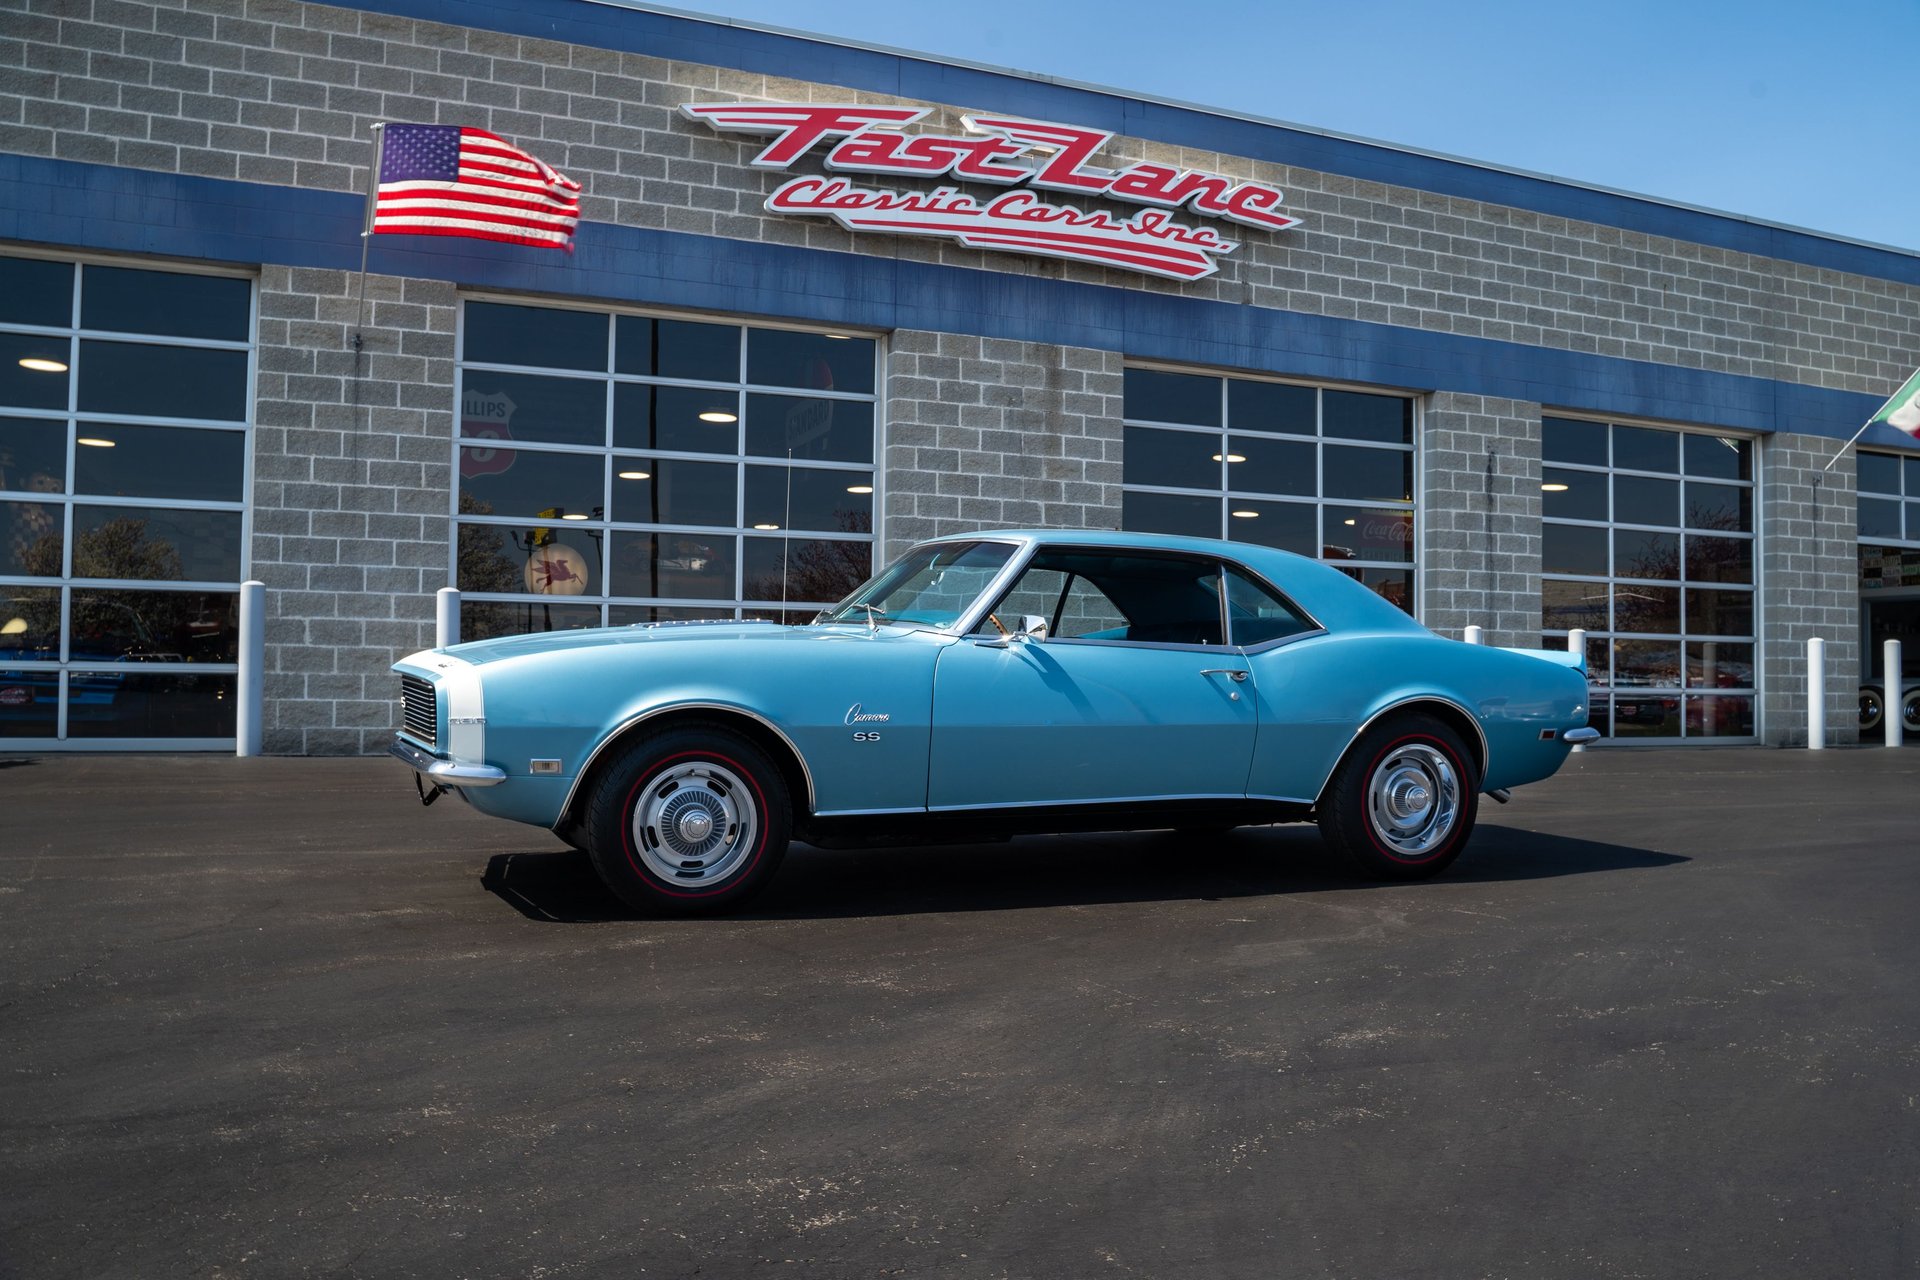 396-Powered 1968 Chevrolet Camaro RS/SS Convertible 4-Speed for